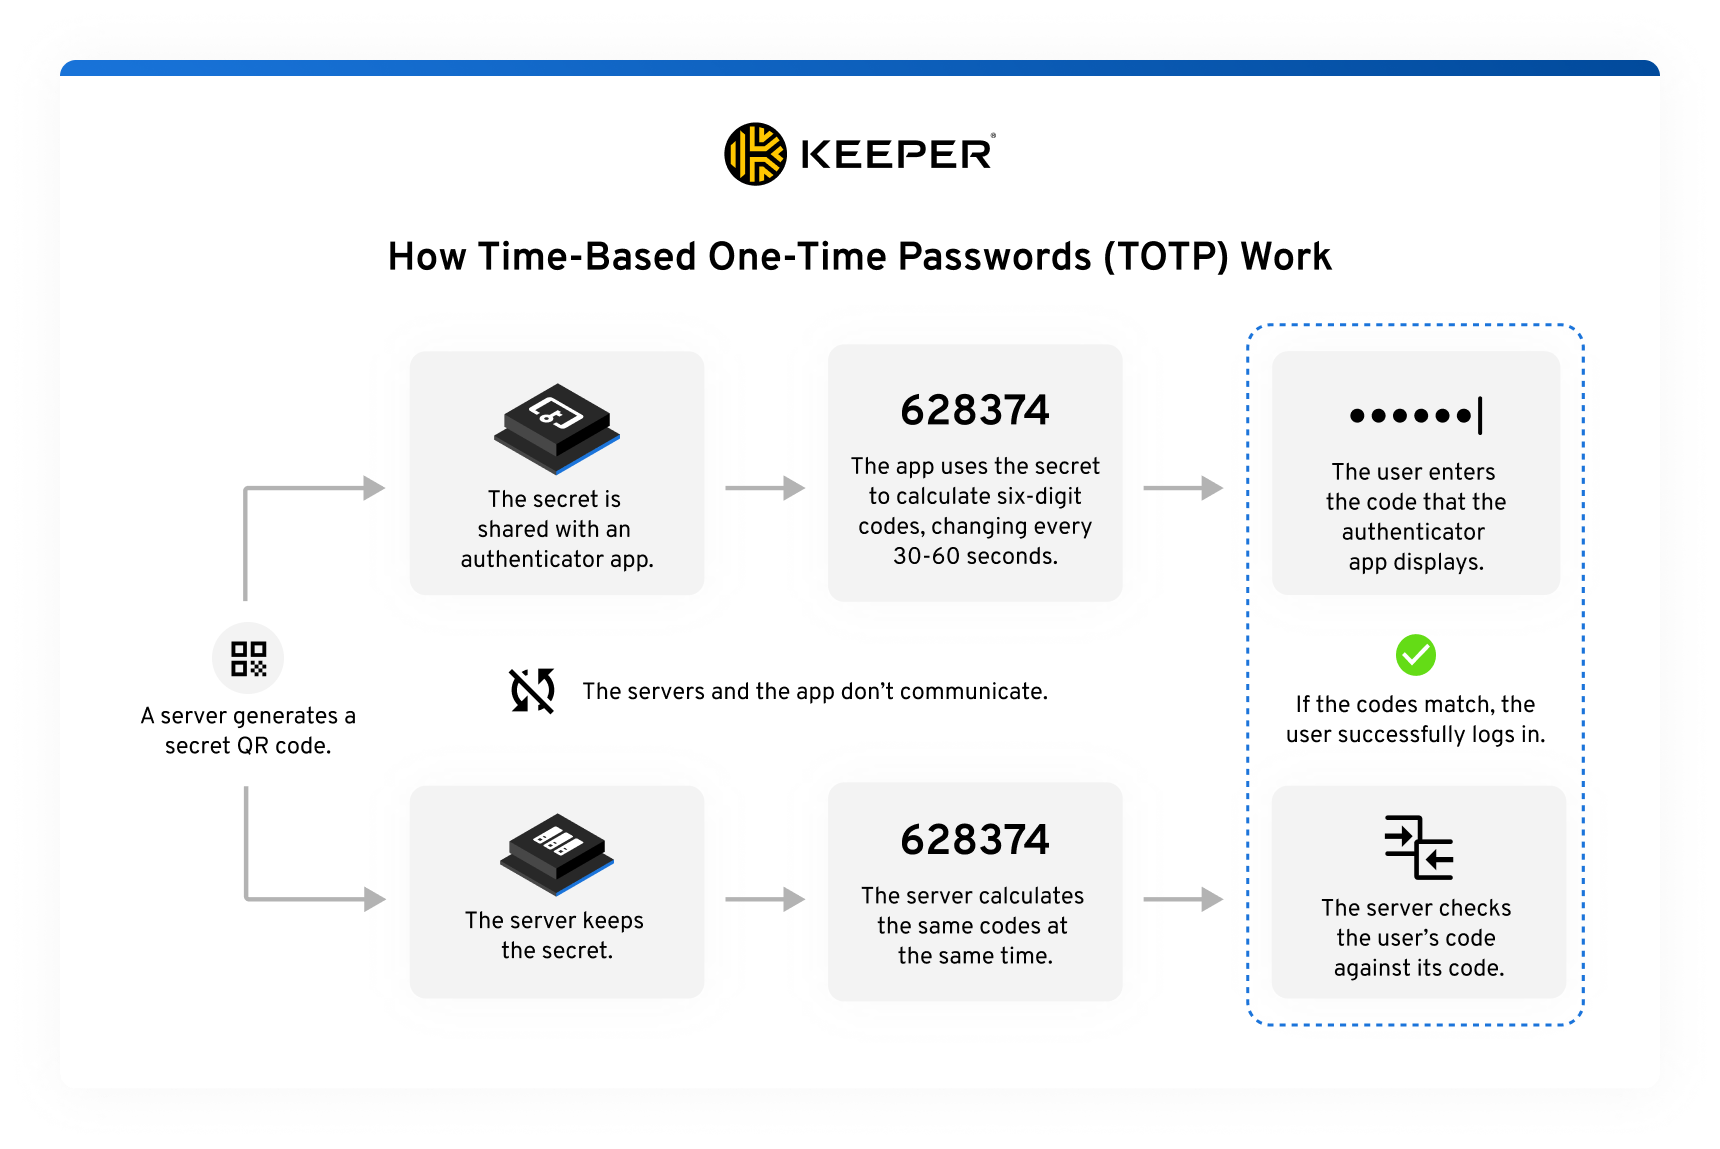 An illustration showing the process of how time-based one-time passwords (TOTP) work. It includes a QR code generated by a server displaying a temporary code, an authenticator app with which the secret is shared with, a six-digit code generated by the app and a symbol to convey the idea of enhanced authentication.